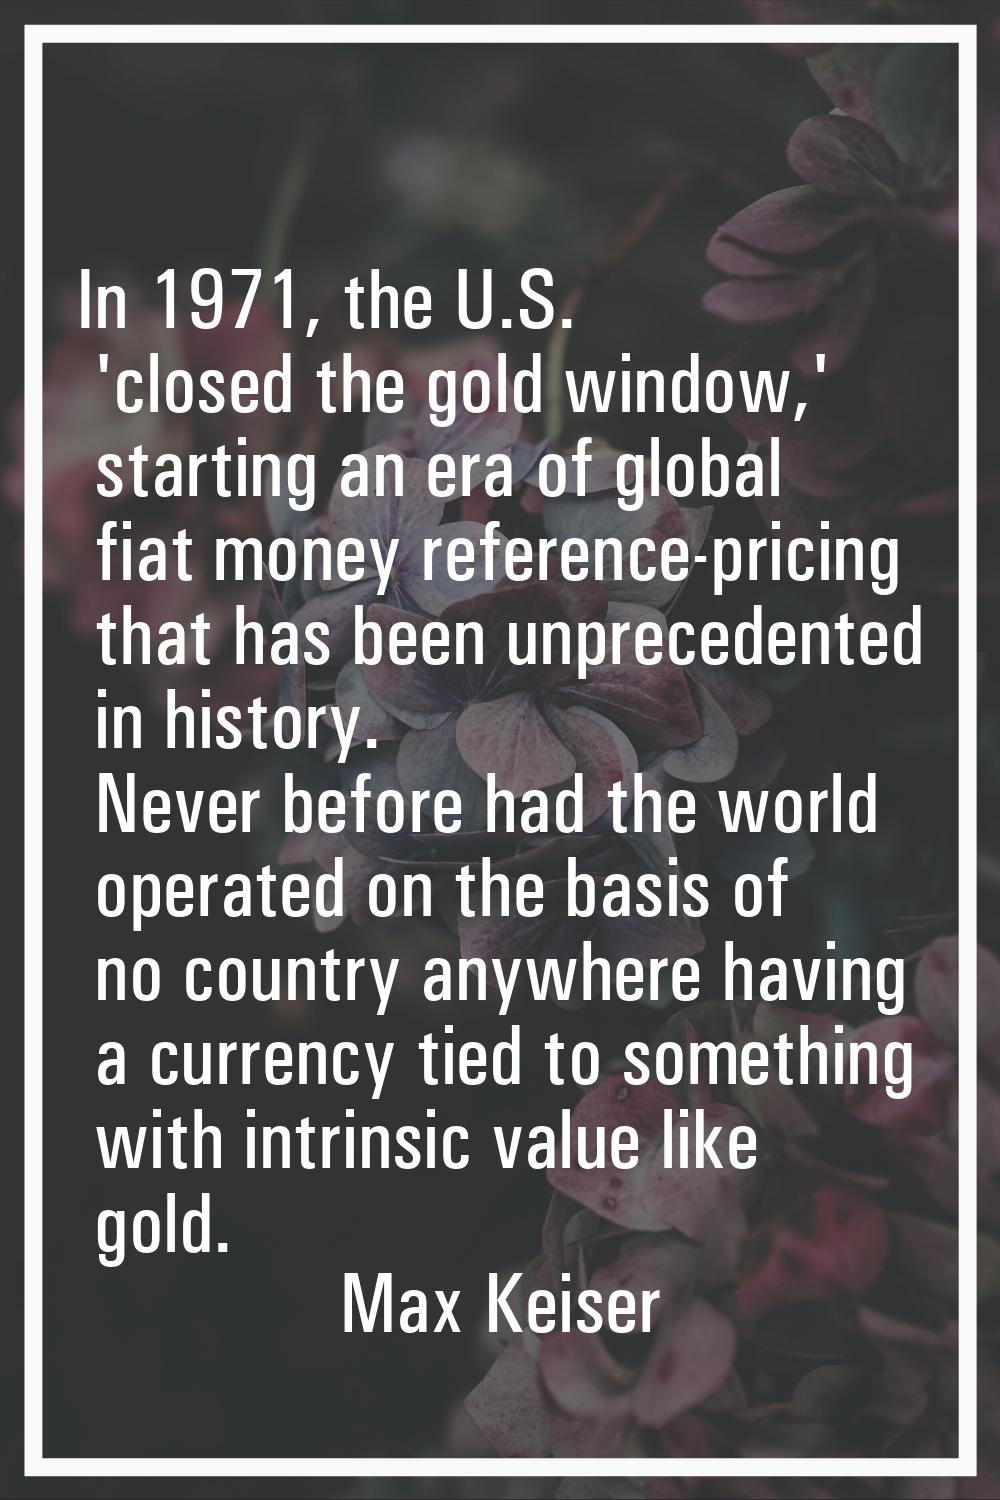 In 1971, the U.S. 'closed the gold window,' starting an era of global fiat money reference-pricing 